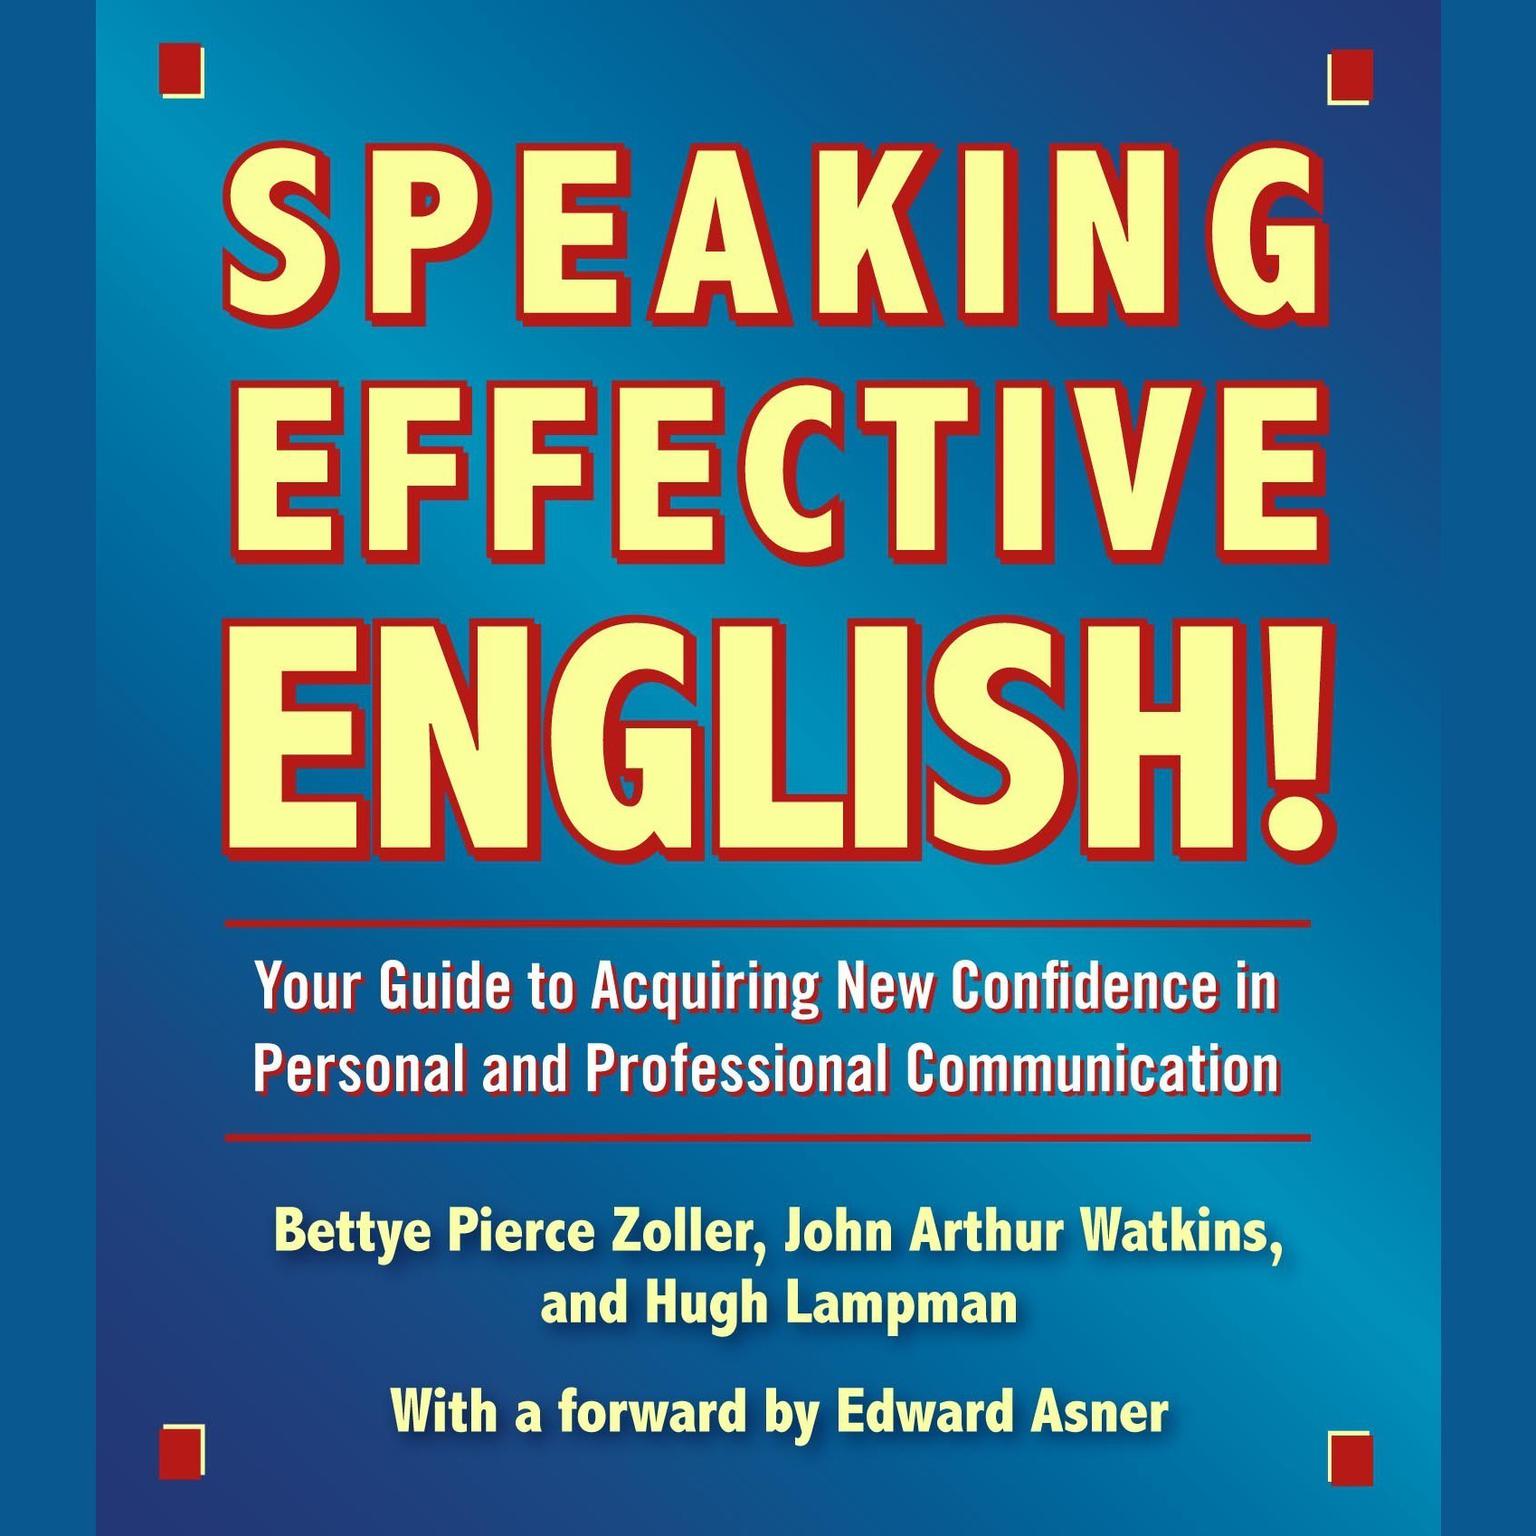 Speaking Effective English! (Abridged): Your Guide to Acquiring New Confidence In Personal and Professional Communication Audiobook, by Bettye Zoller